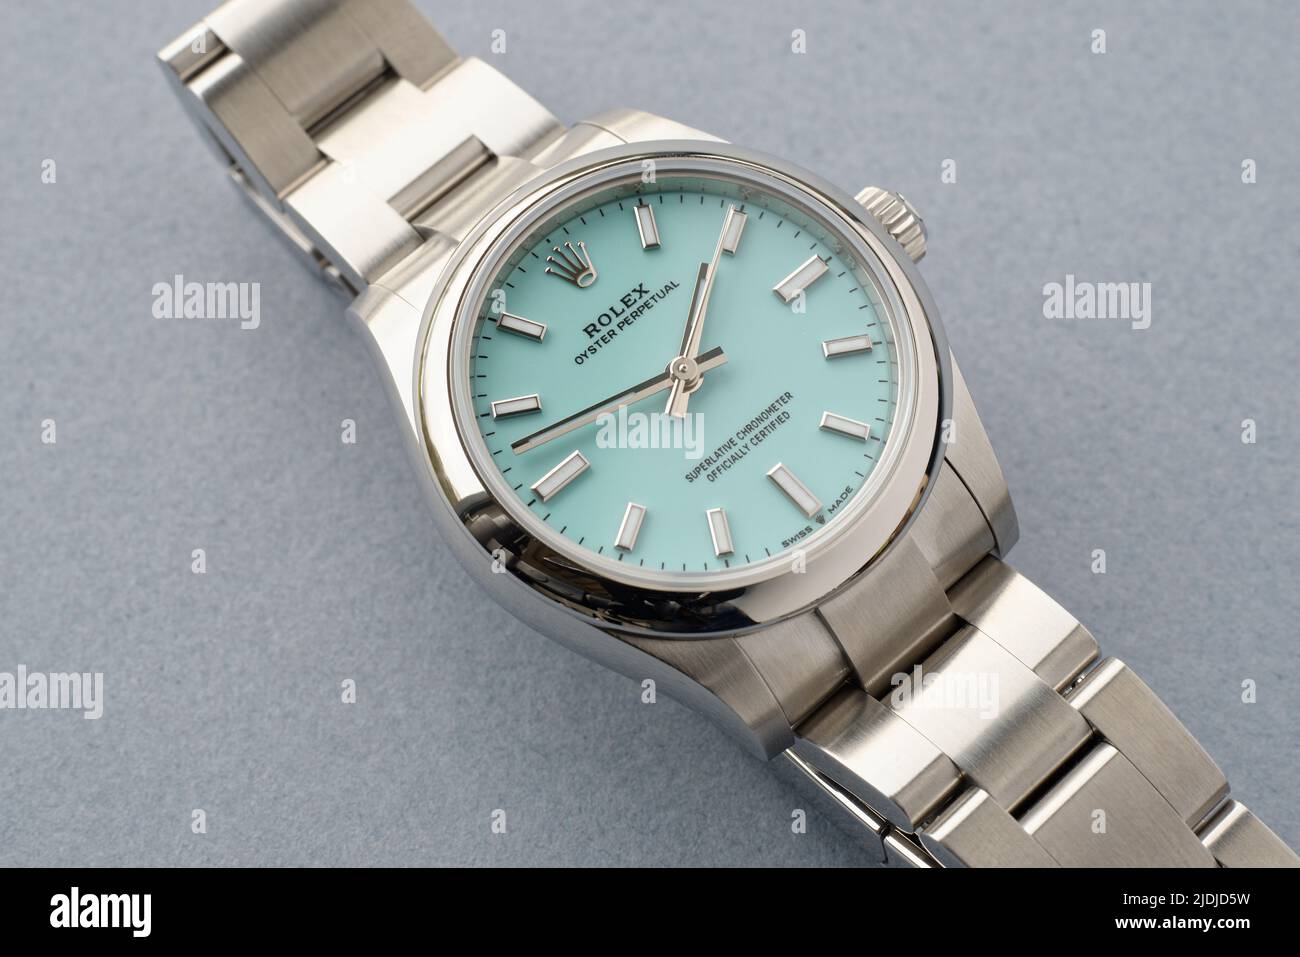 Rolex Oyster Perpetual, superlative chronometer officially certified. Tiffany Turquoise Blue face. Stock Photo